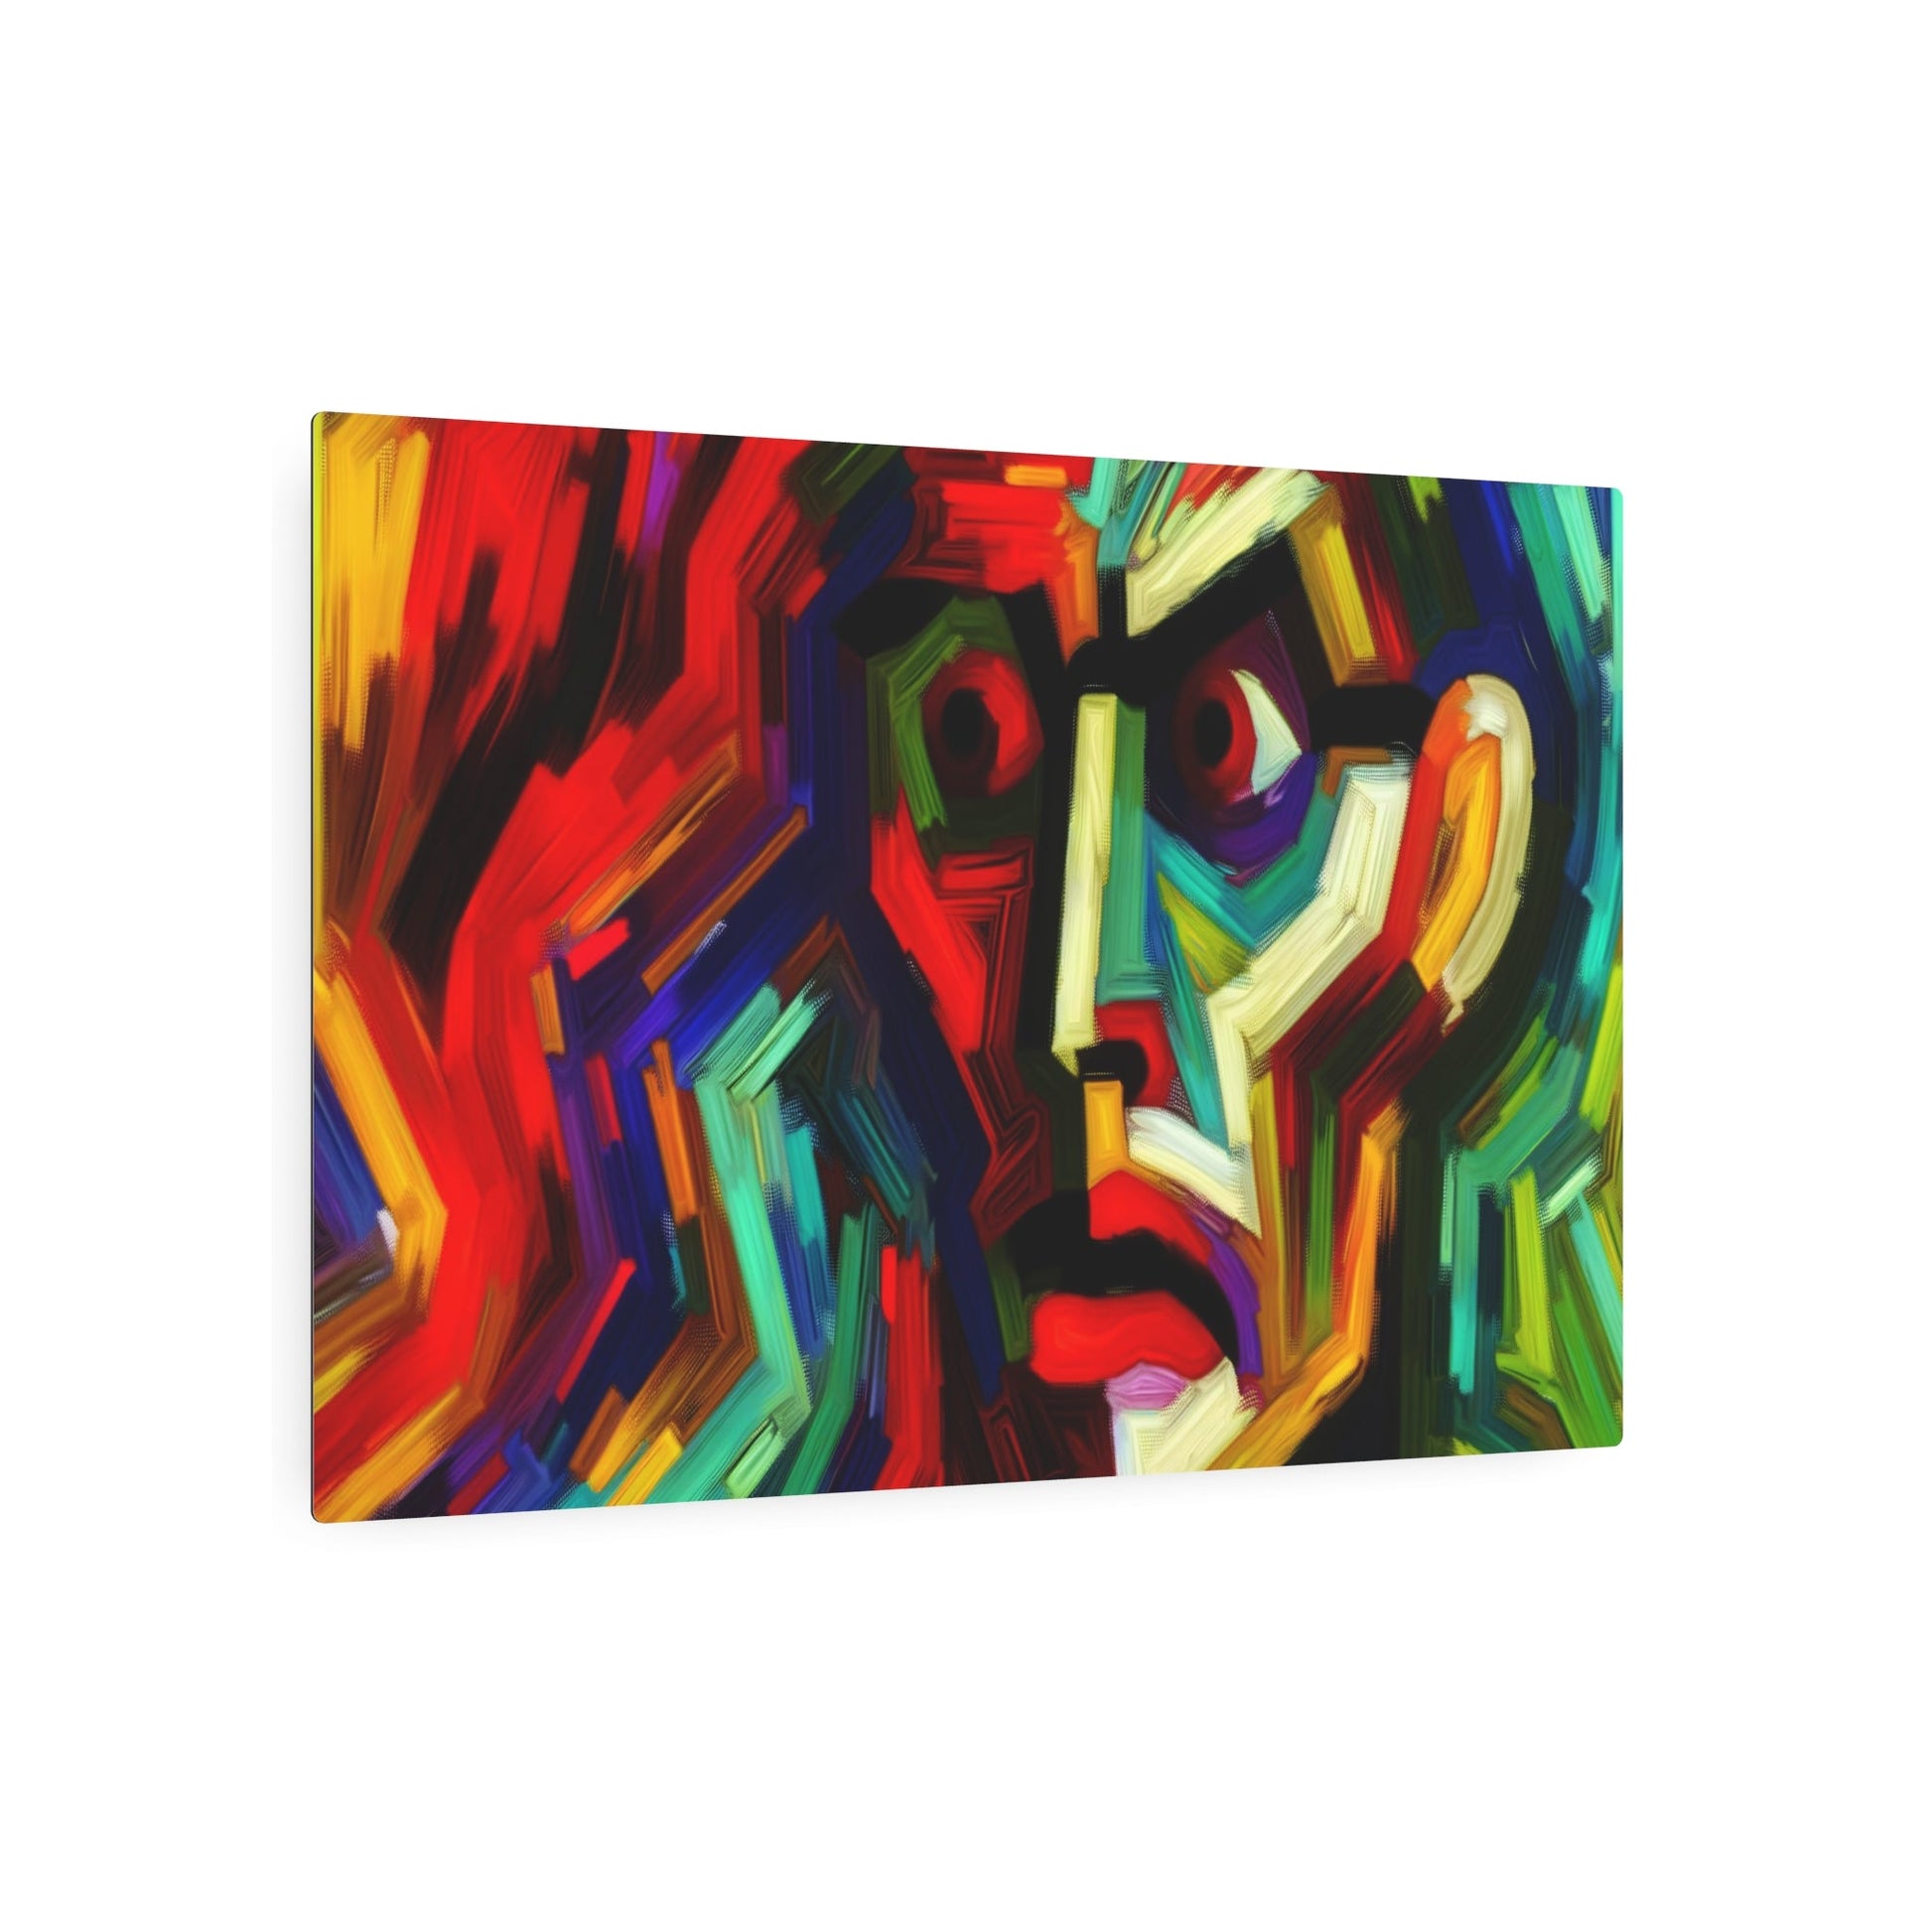 Metal Poster Art | "Expressionism Inspired Art Image - Emotional and Psychological Intensity Reflected in Western Art Styles" - Metal Poster Art 36″ x 24″ (Horizontal) 0.12''